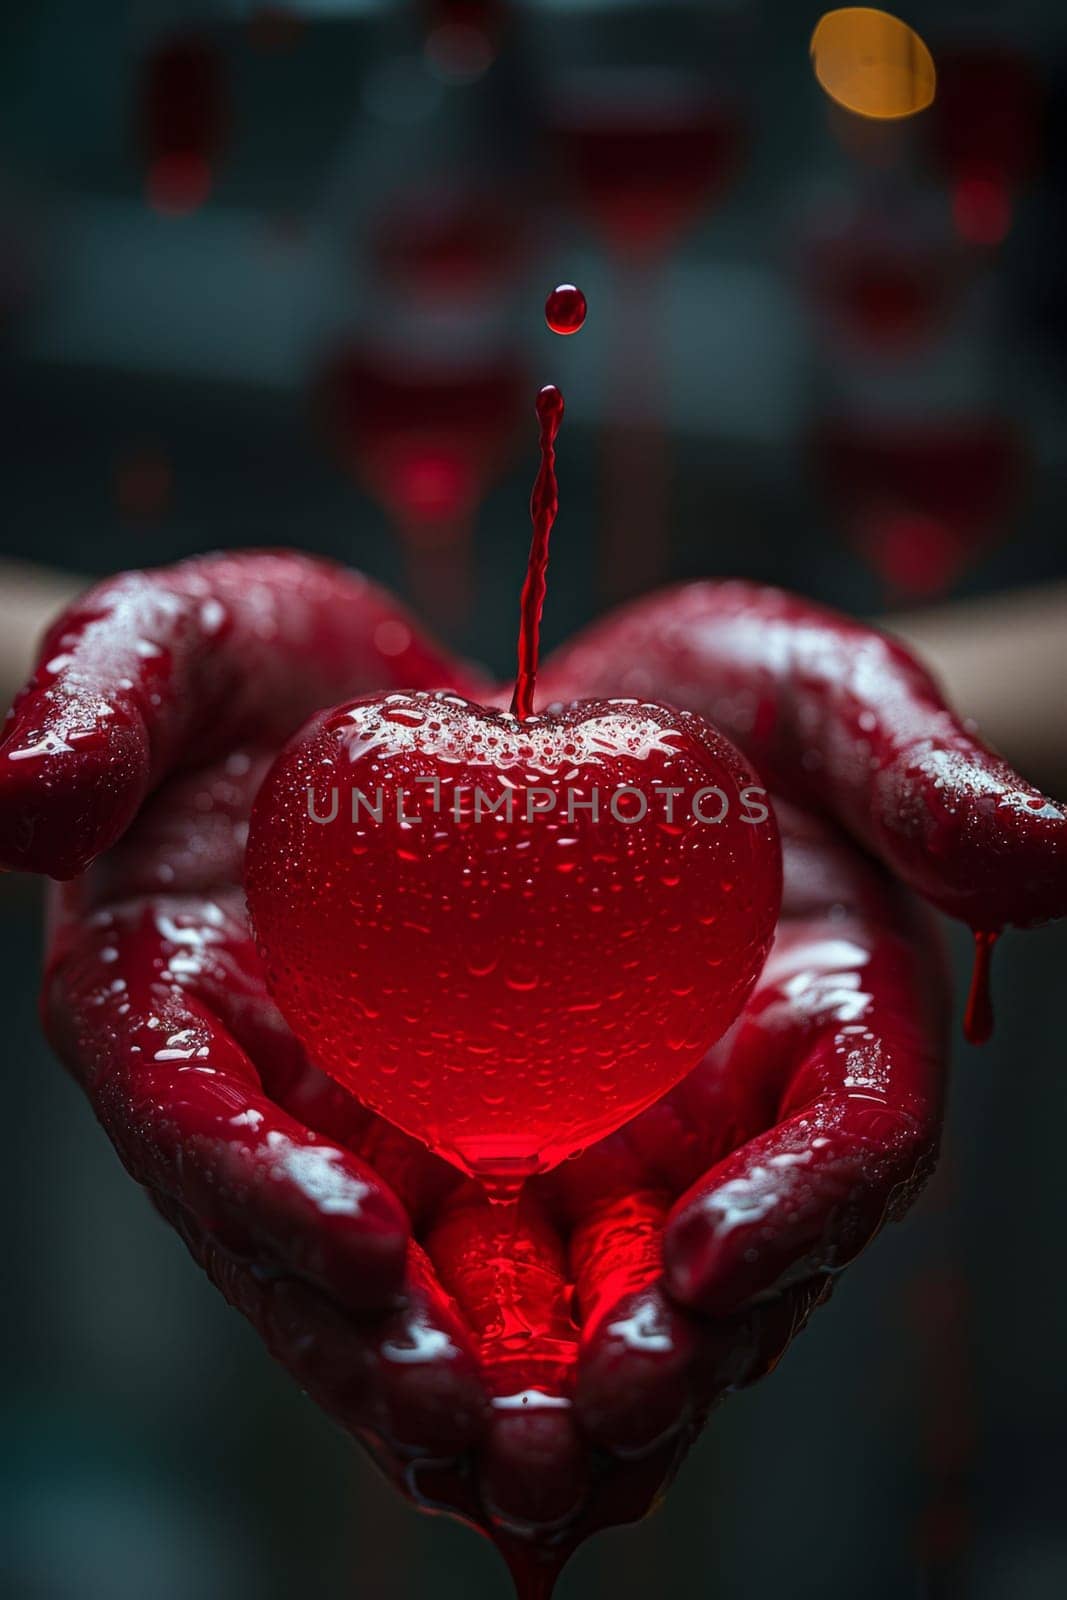 hands holding a red heart, medical insurance for the heart, Organ donation, World Blood Donor Day by Lobachad